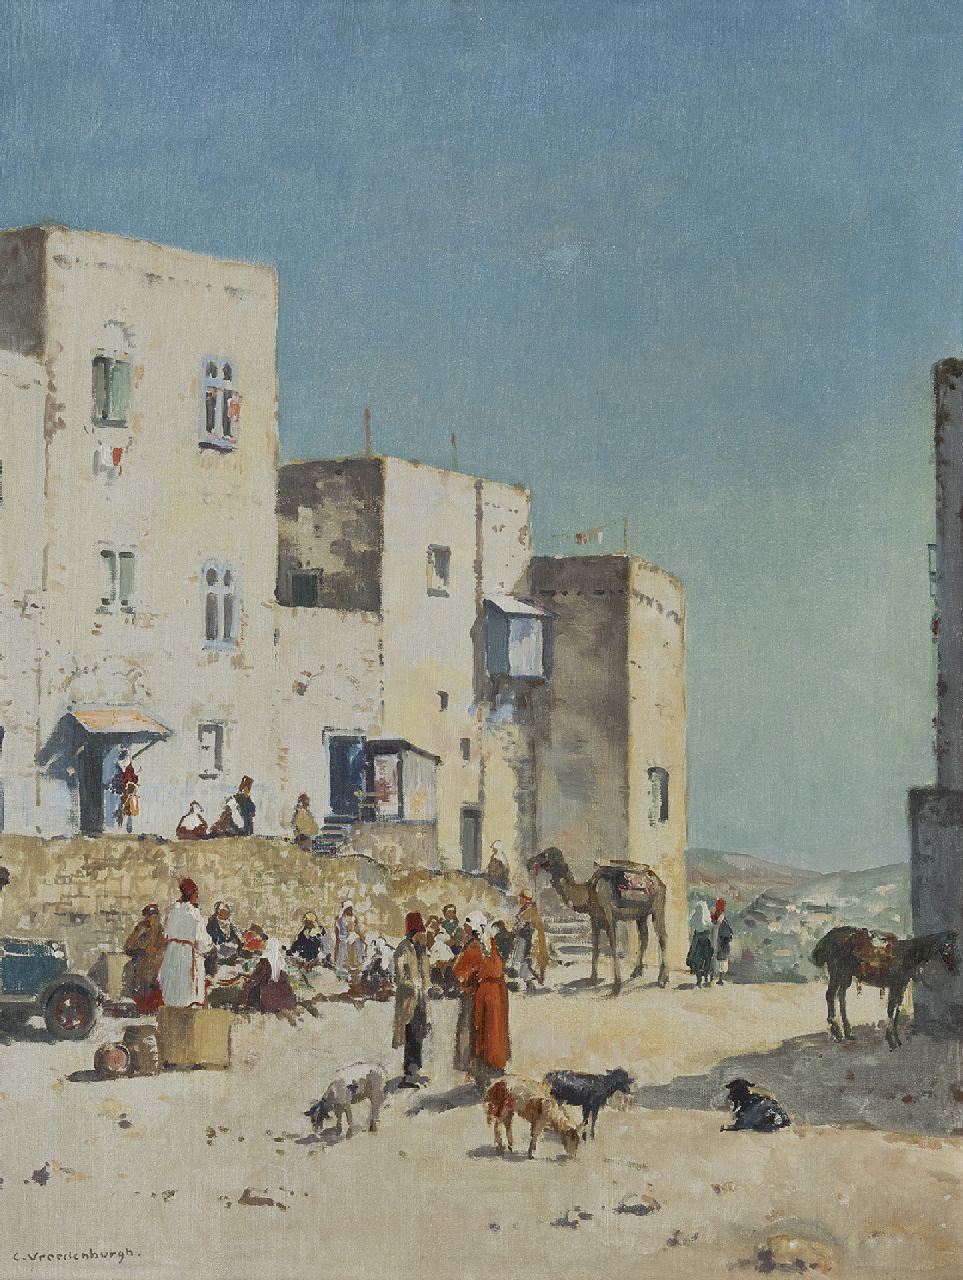 Vreedenburgh C.  | Cornelis Vreedenburgh | Paintings offered for sale | A village in Bethlehem, Palestine, oil on canvas 50.9 x 38.2 cm, signed l.l. and painted ca. 1936